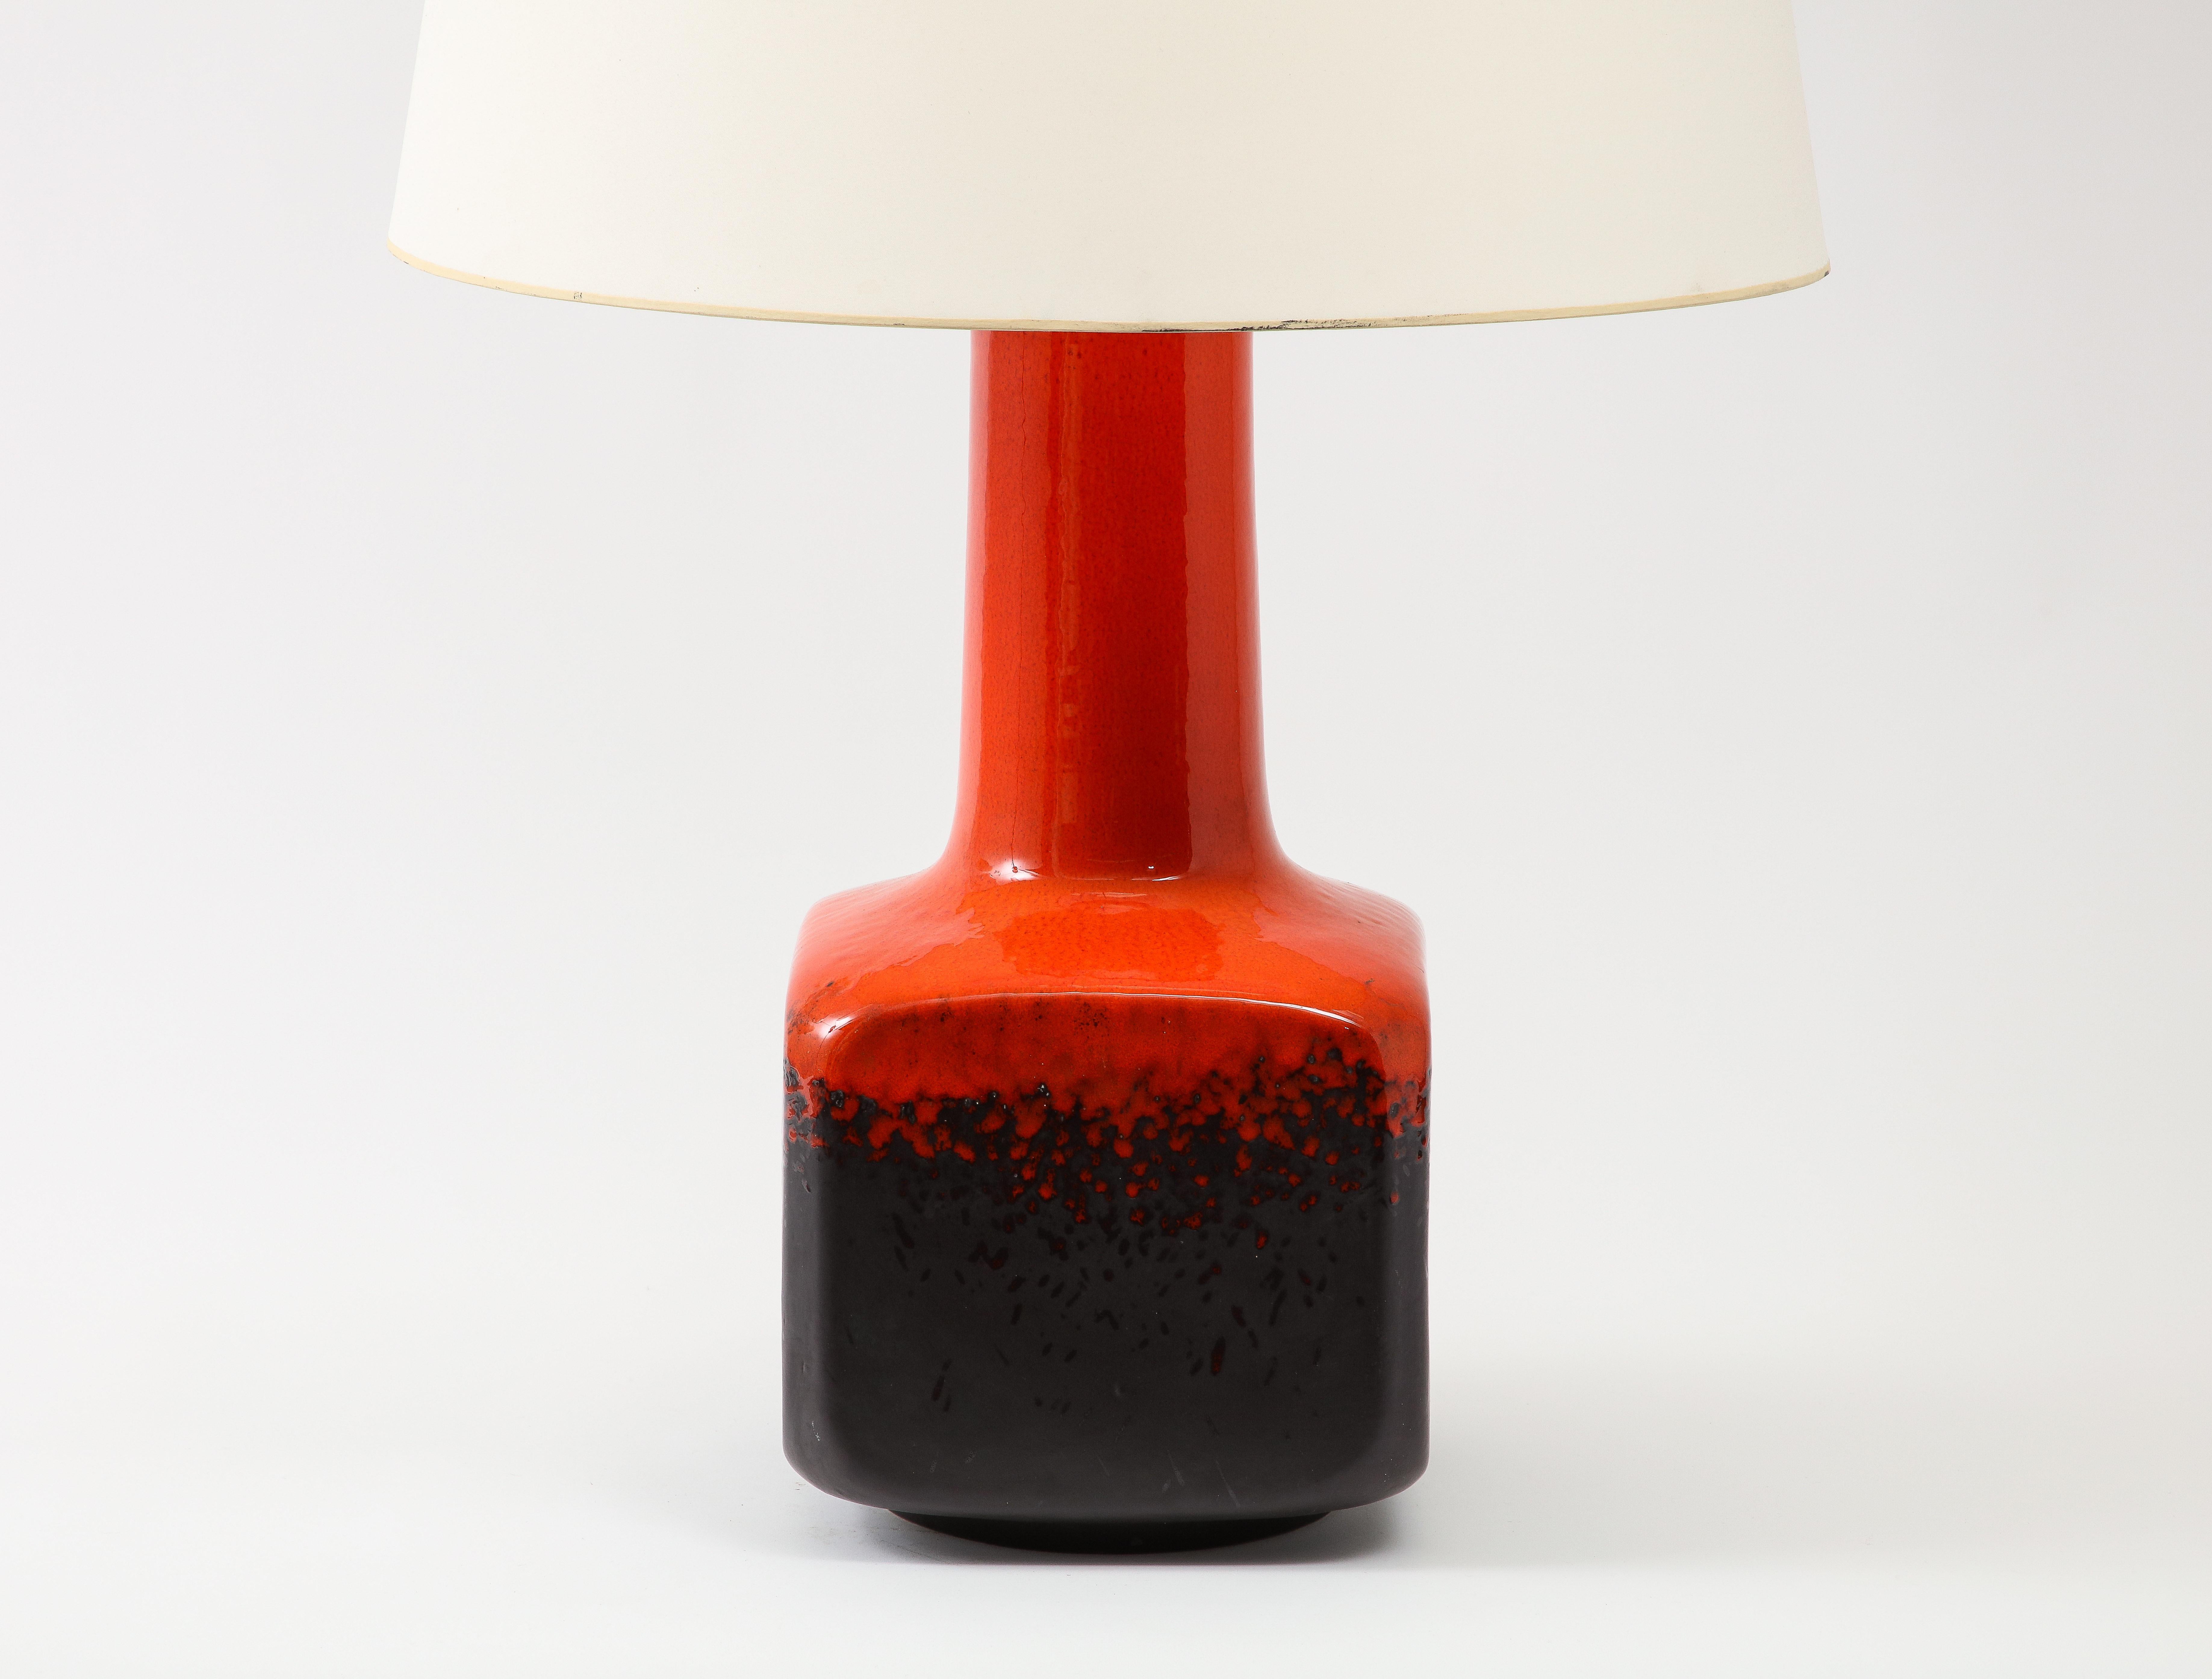 Large dual glazed ceramic table lamp by Cloutier Fréres. Rewired. Shade available on request.